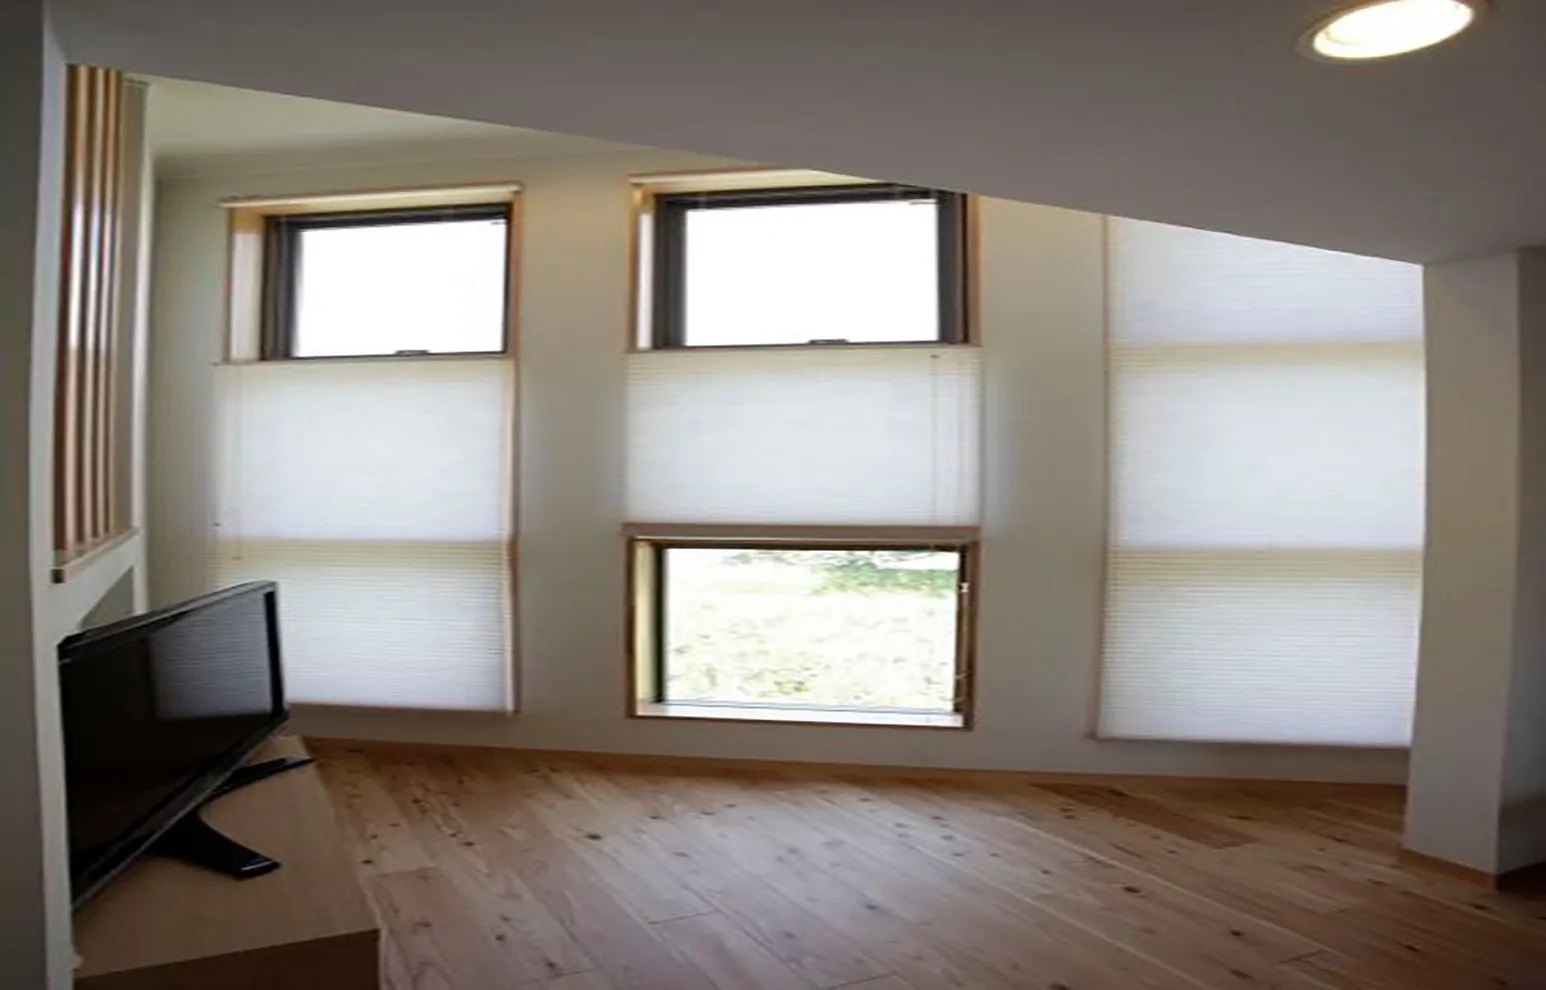 Style of Blinds